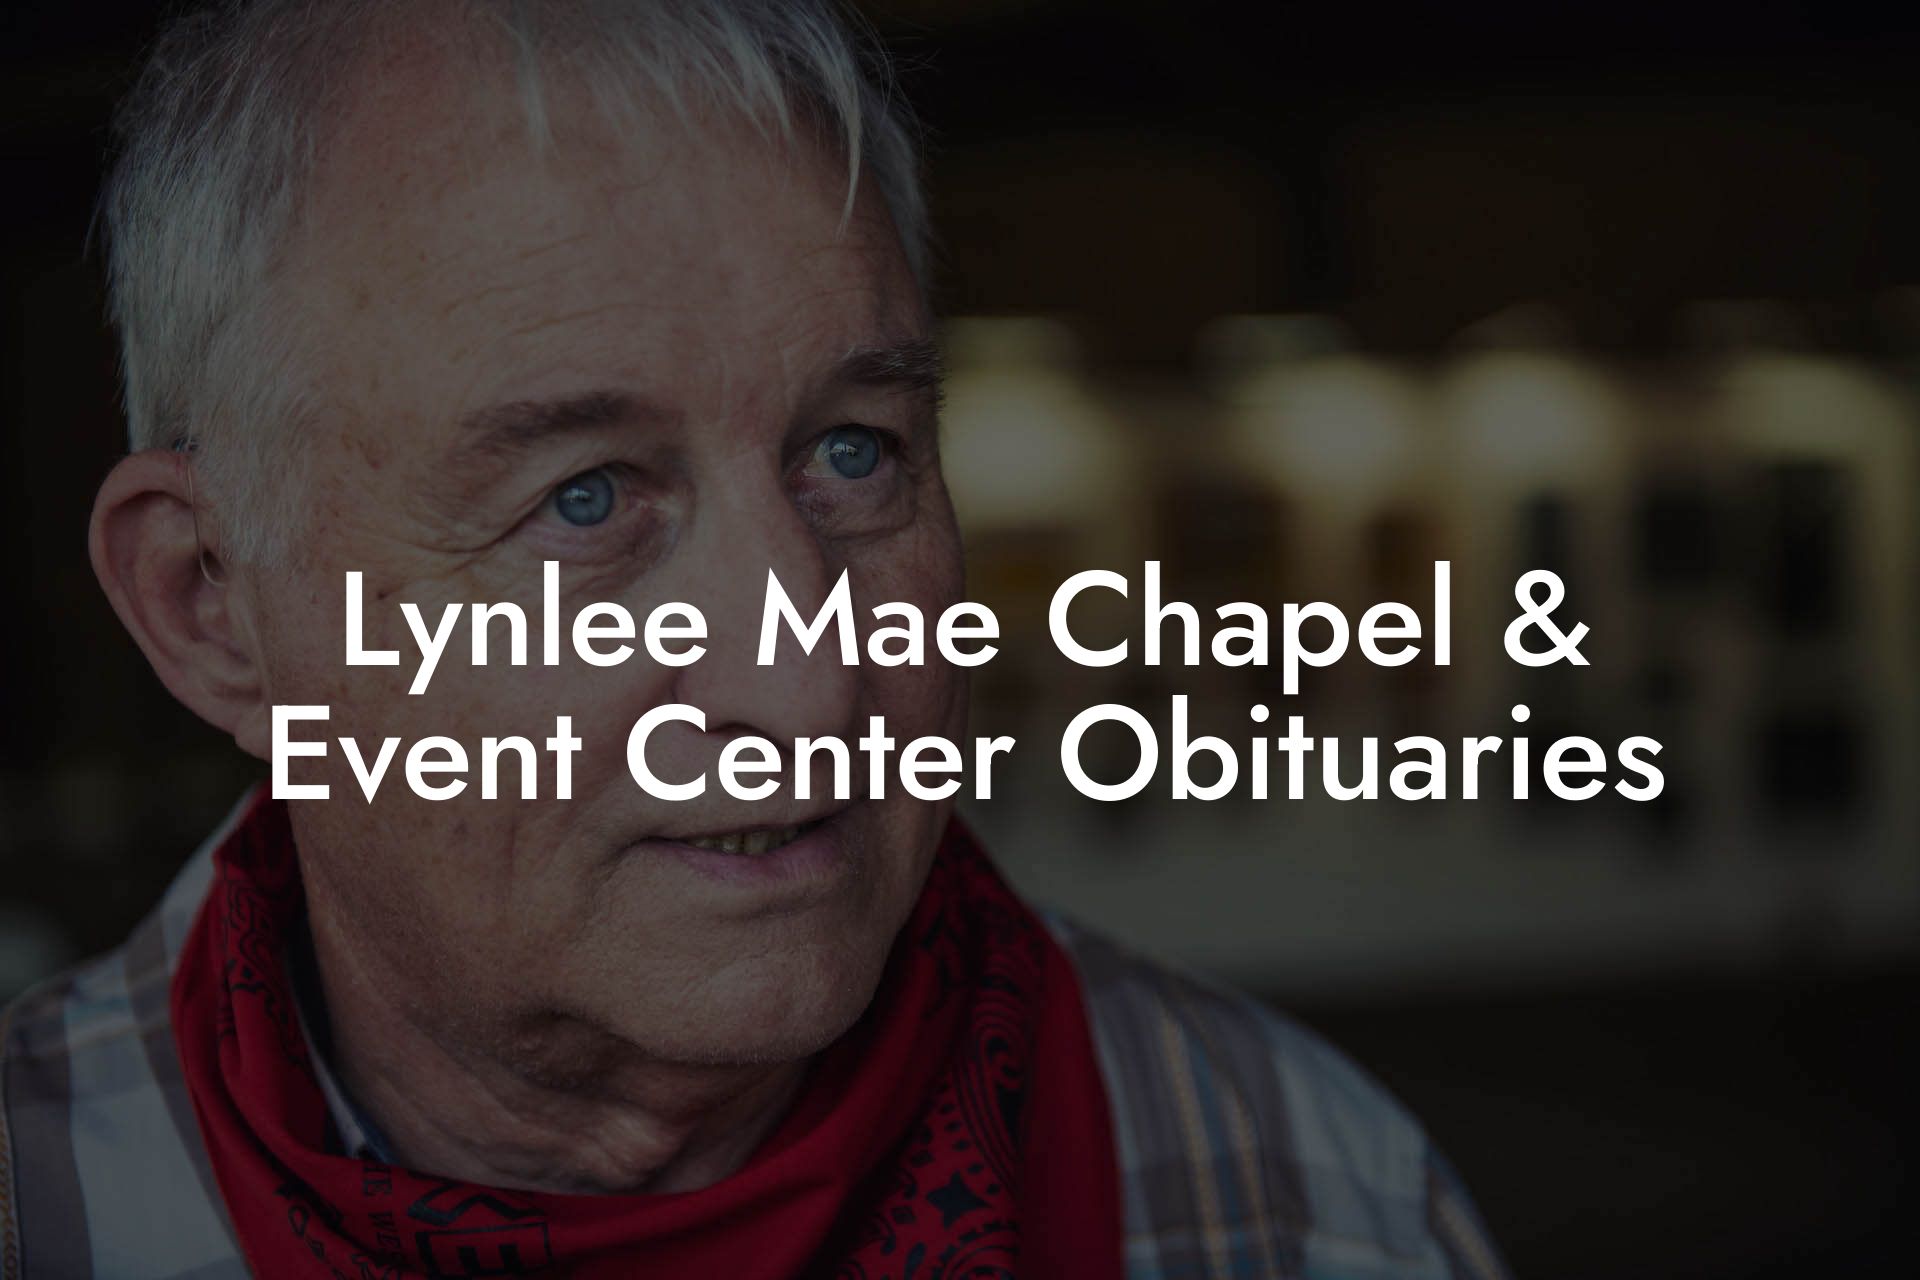 Lynlee Mae Chapel & Event Center Obituaries